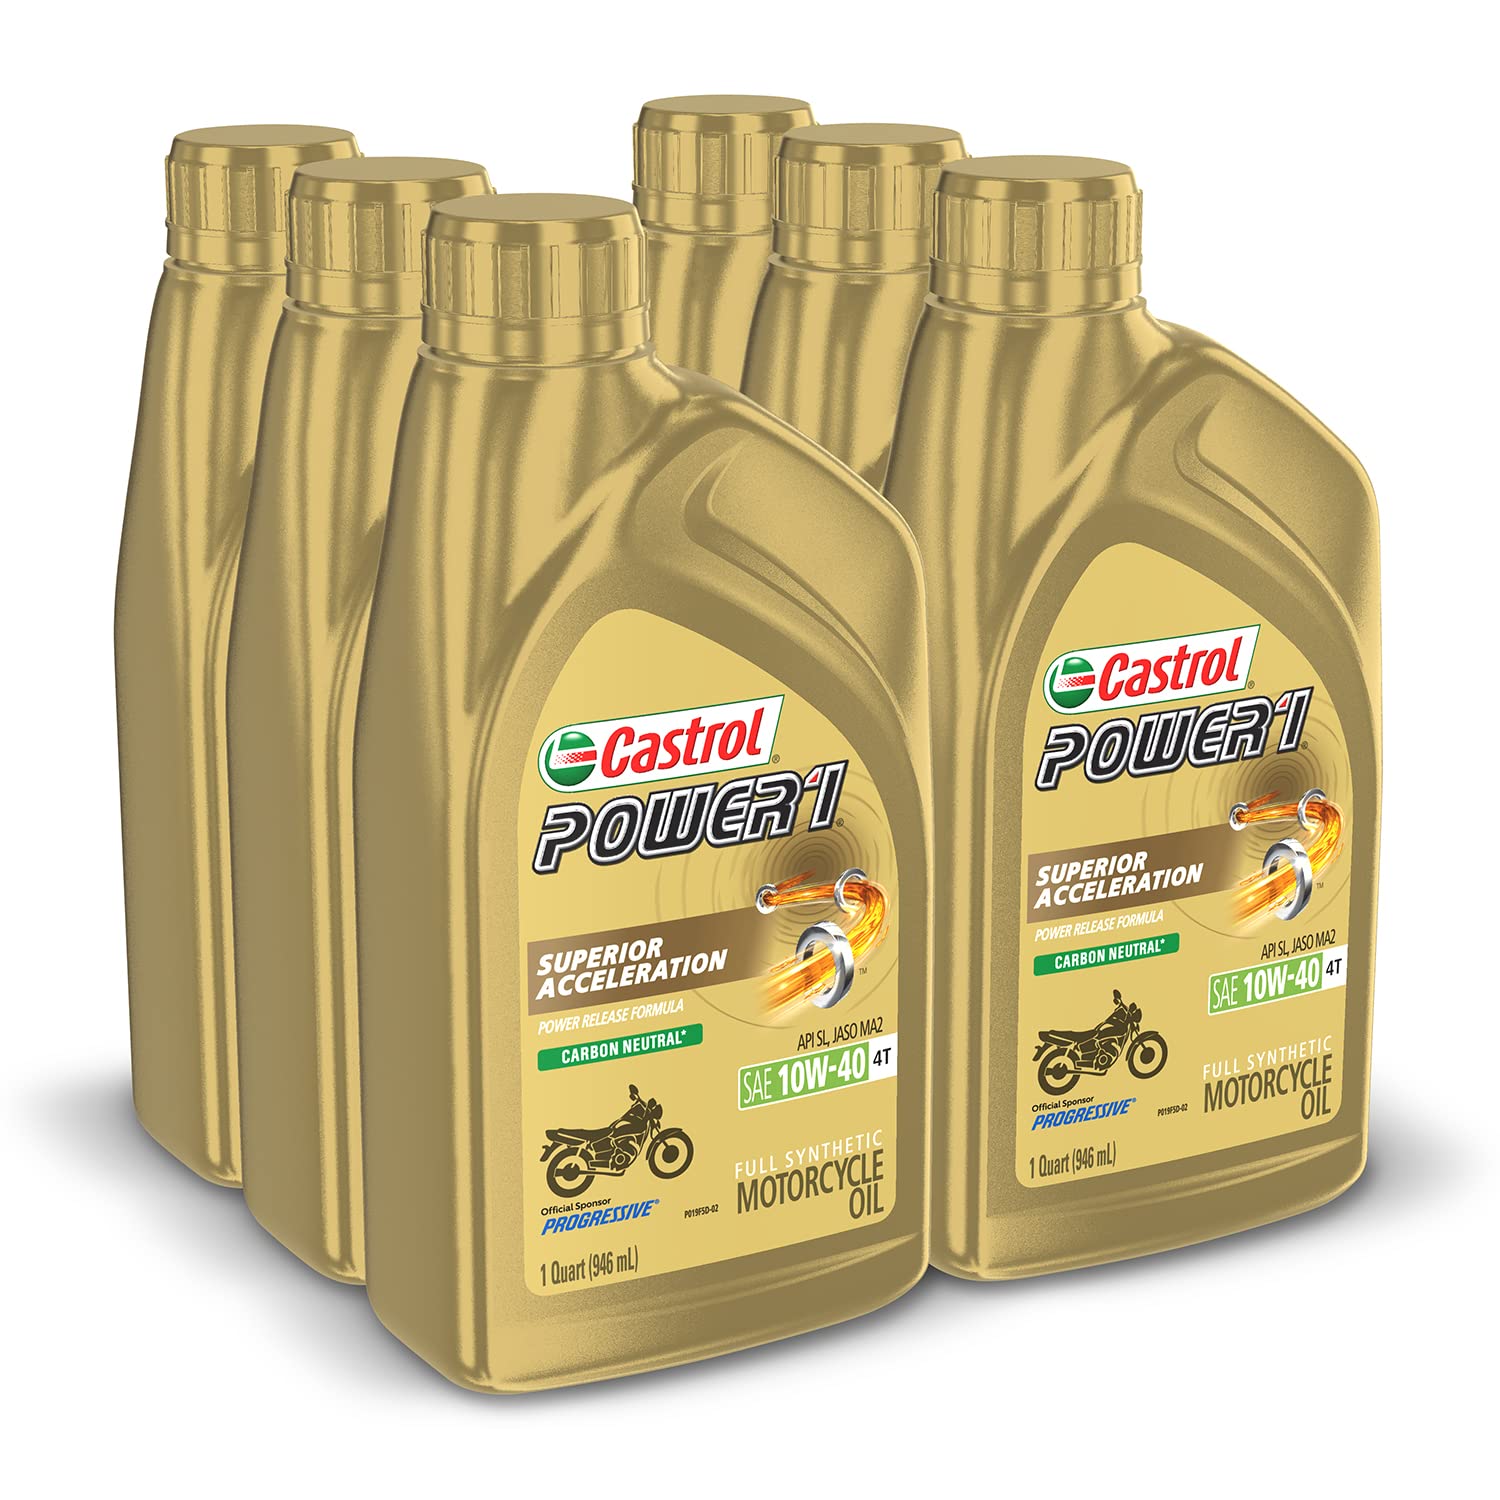 Castrol Power1 4T 10W-40 Full Synthetic Motorcycle Oil, 1 Quart Pack of 6, $34.64 with S&S